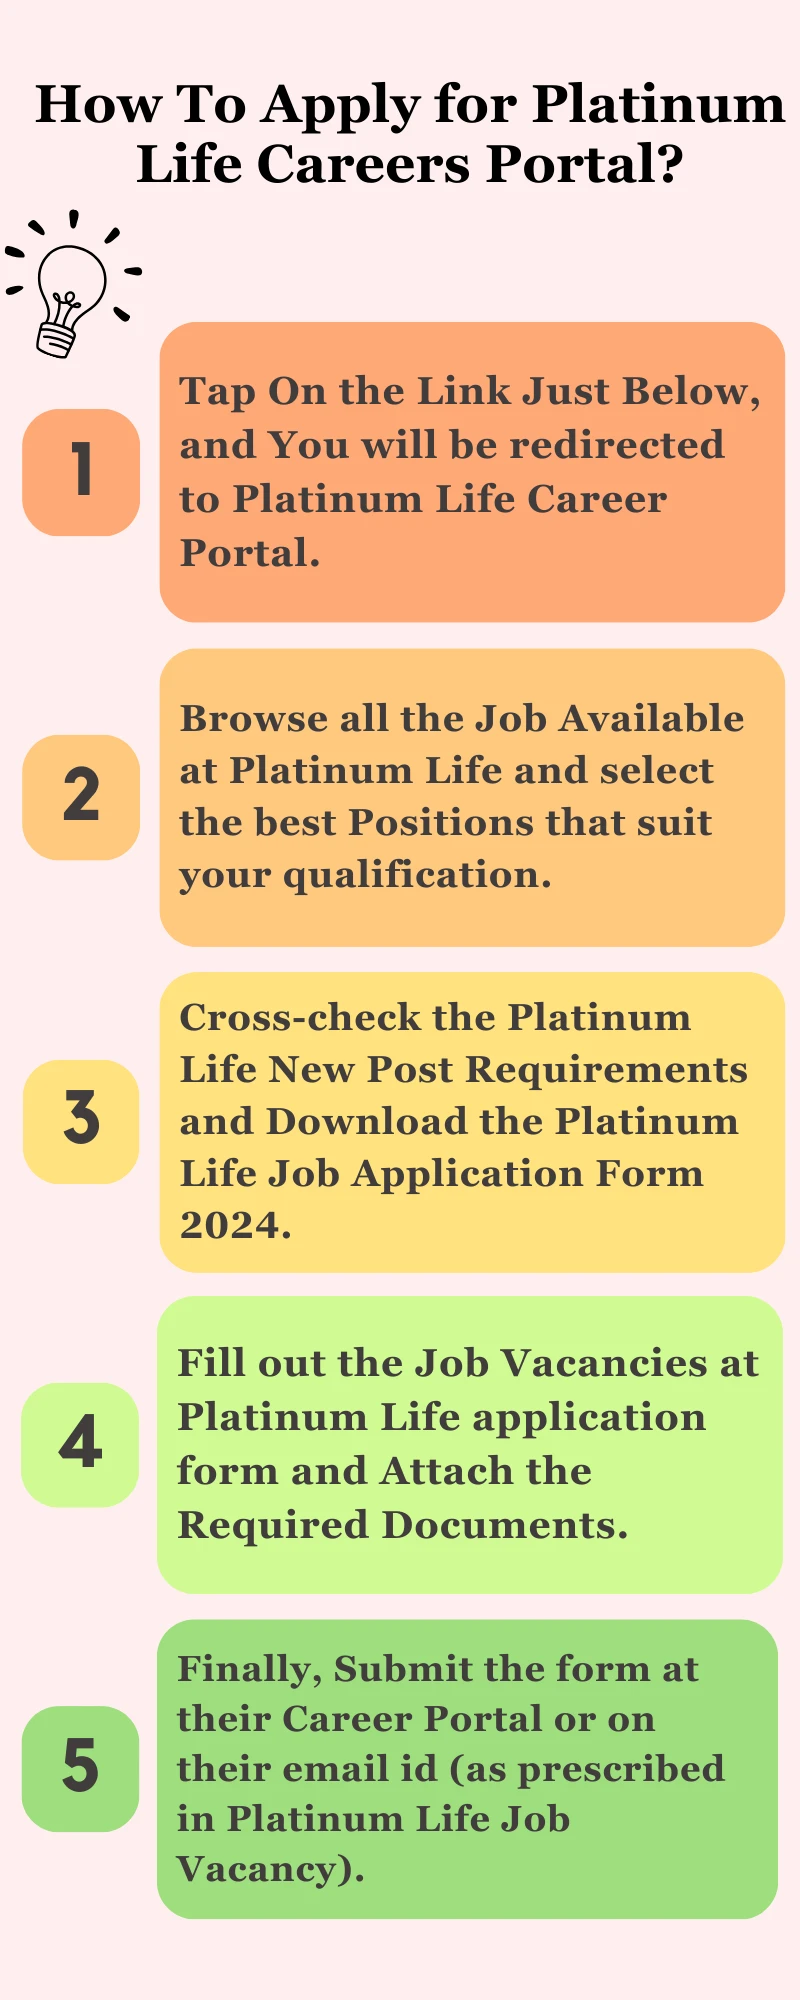 How To Apply for Platinum Life Careers Portal?